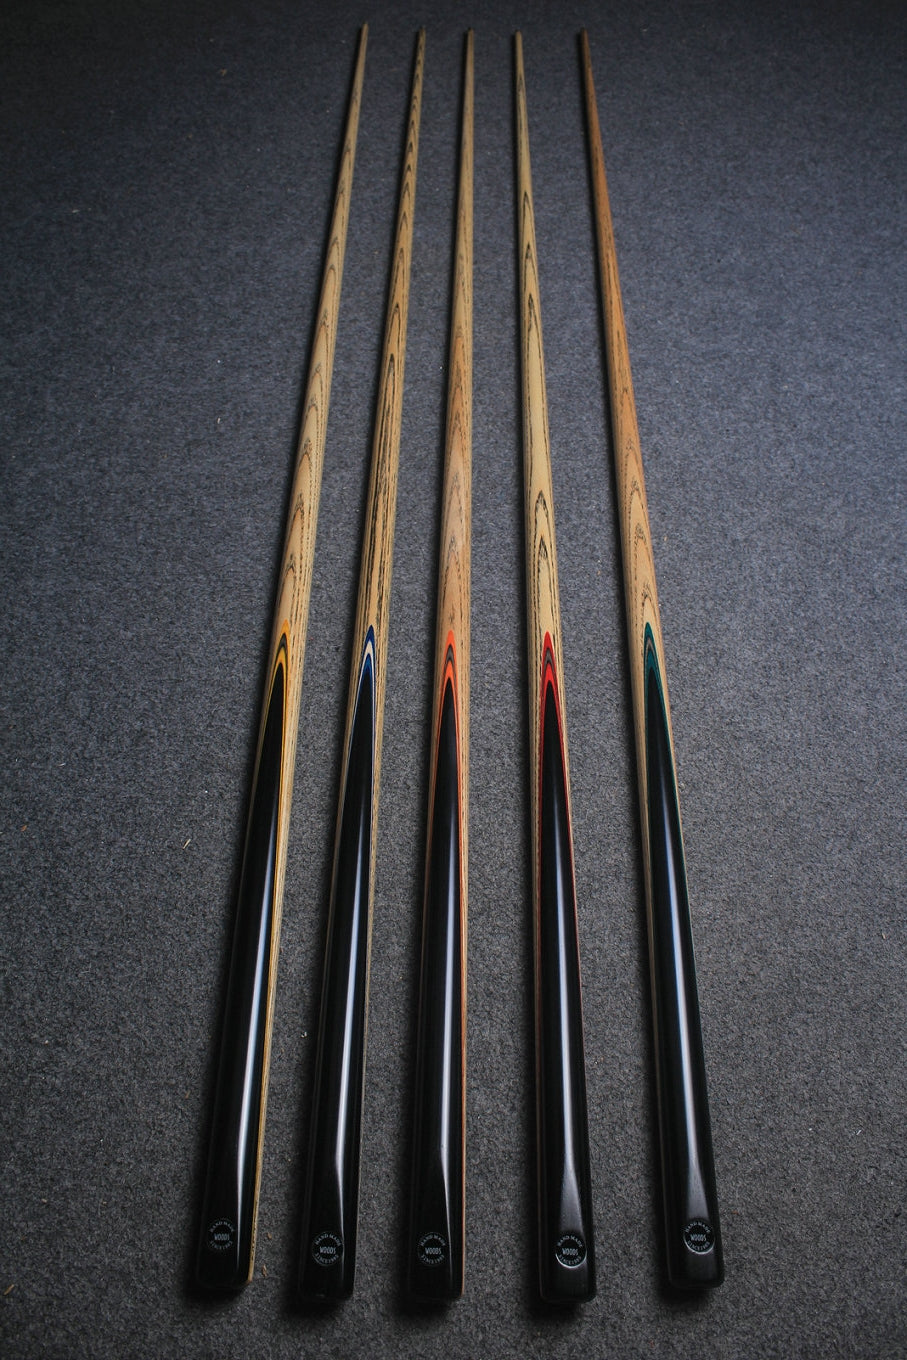 1 piece handmade ash snooker/ pool cue - variant length , variant tip size